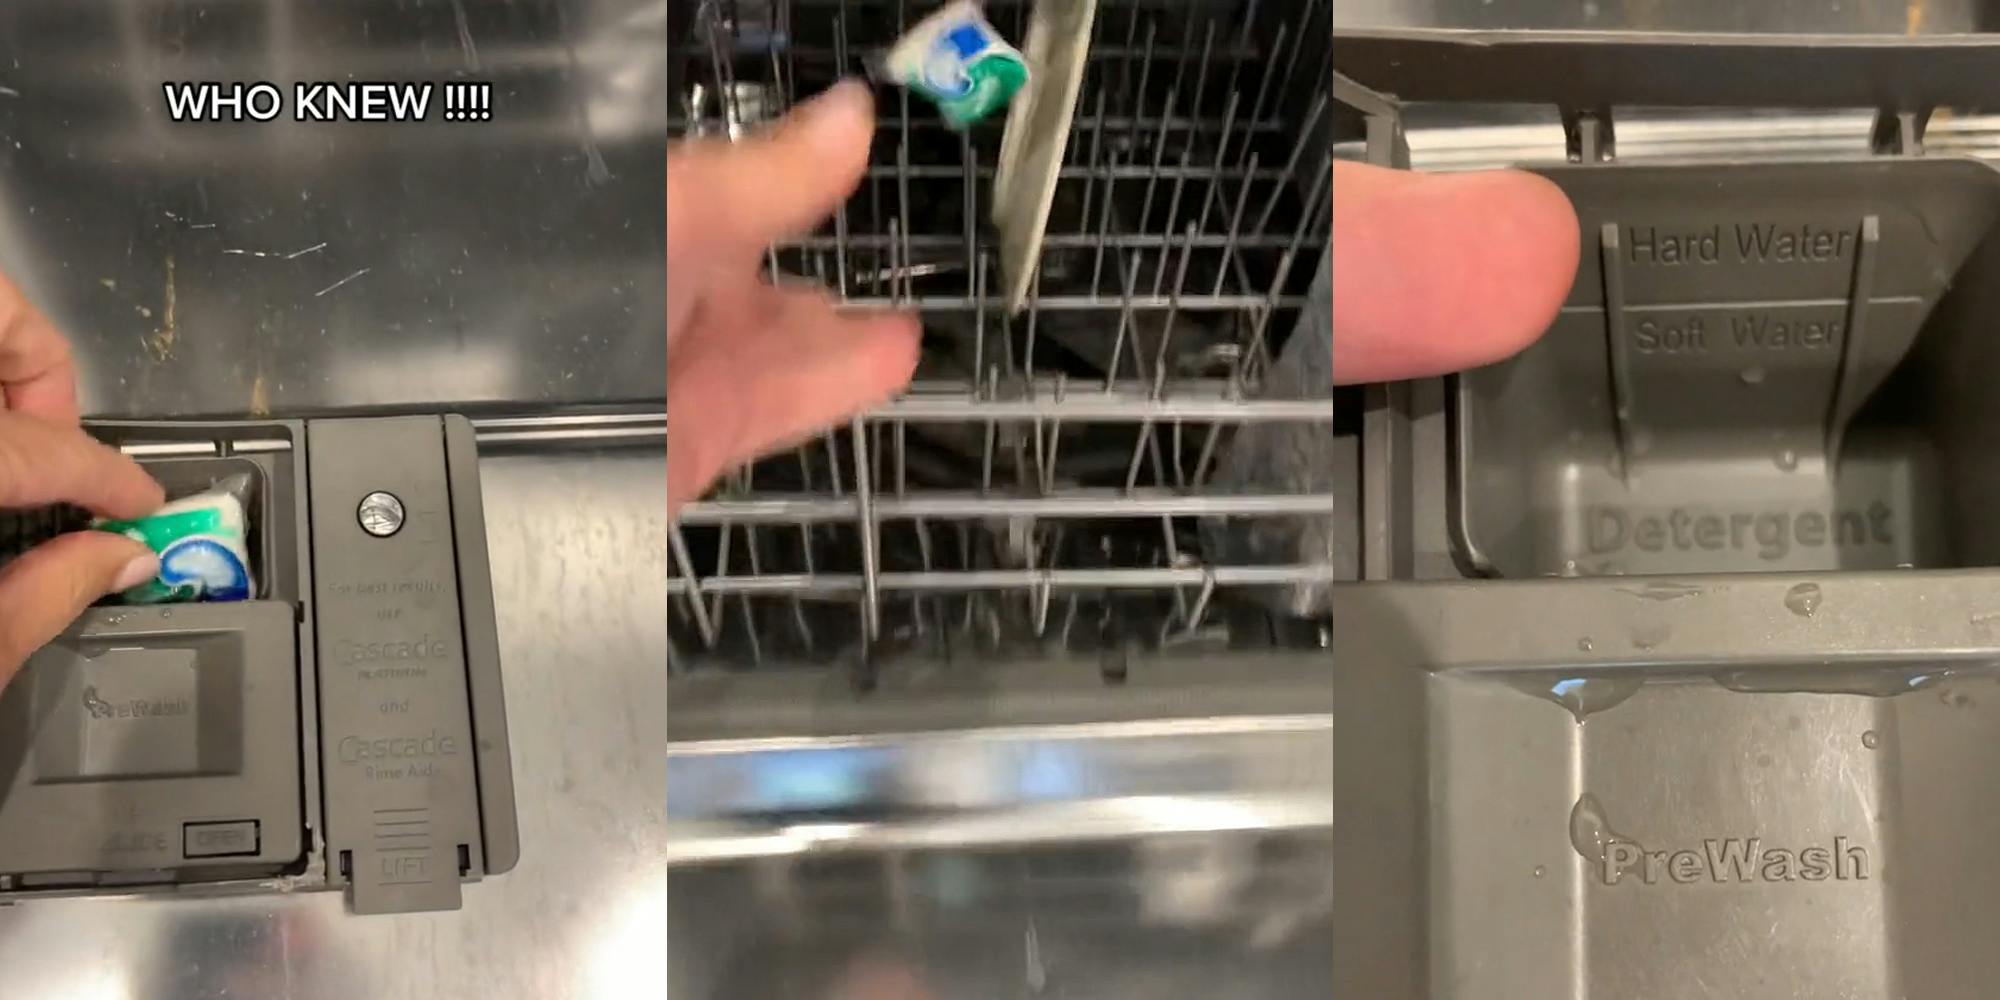 hand loading detergent pod into dishwasher detergent compartment with caption "WHO KNEW!!!!" (l) hand throwing detergent pod into dishwasher (c) finger pointing to detergent compartment of dishwasher (r)